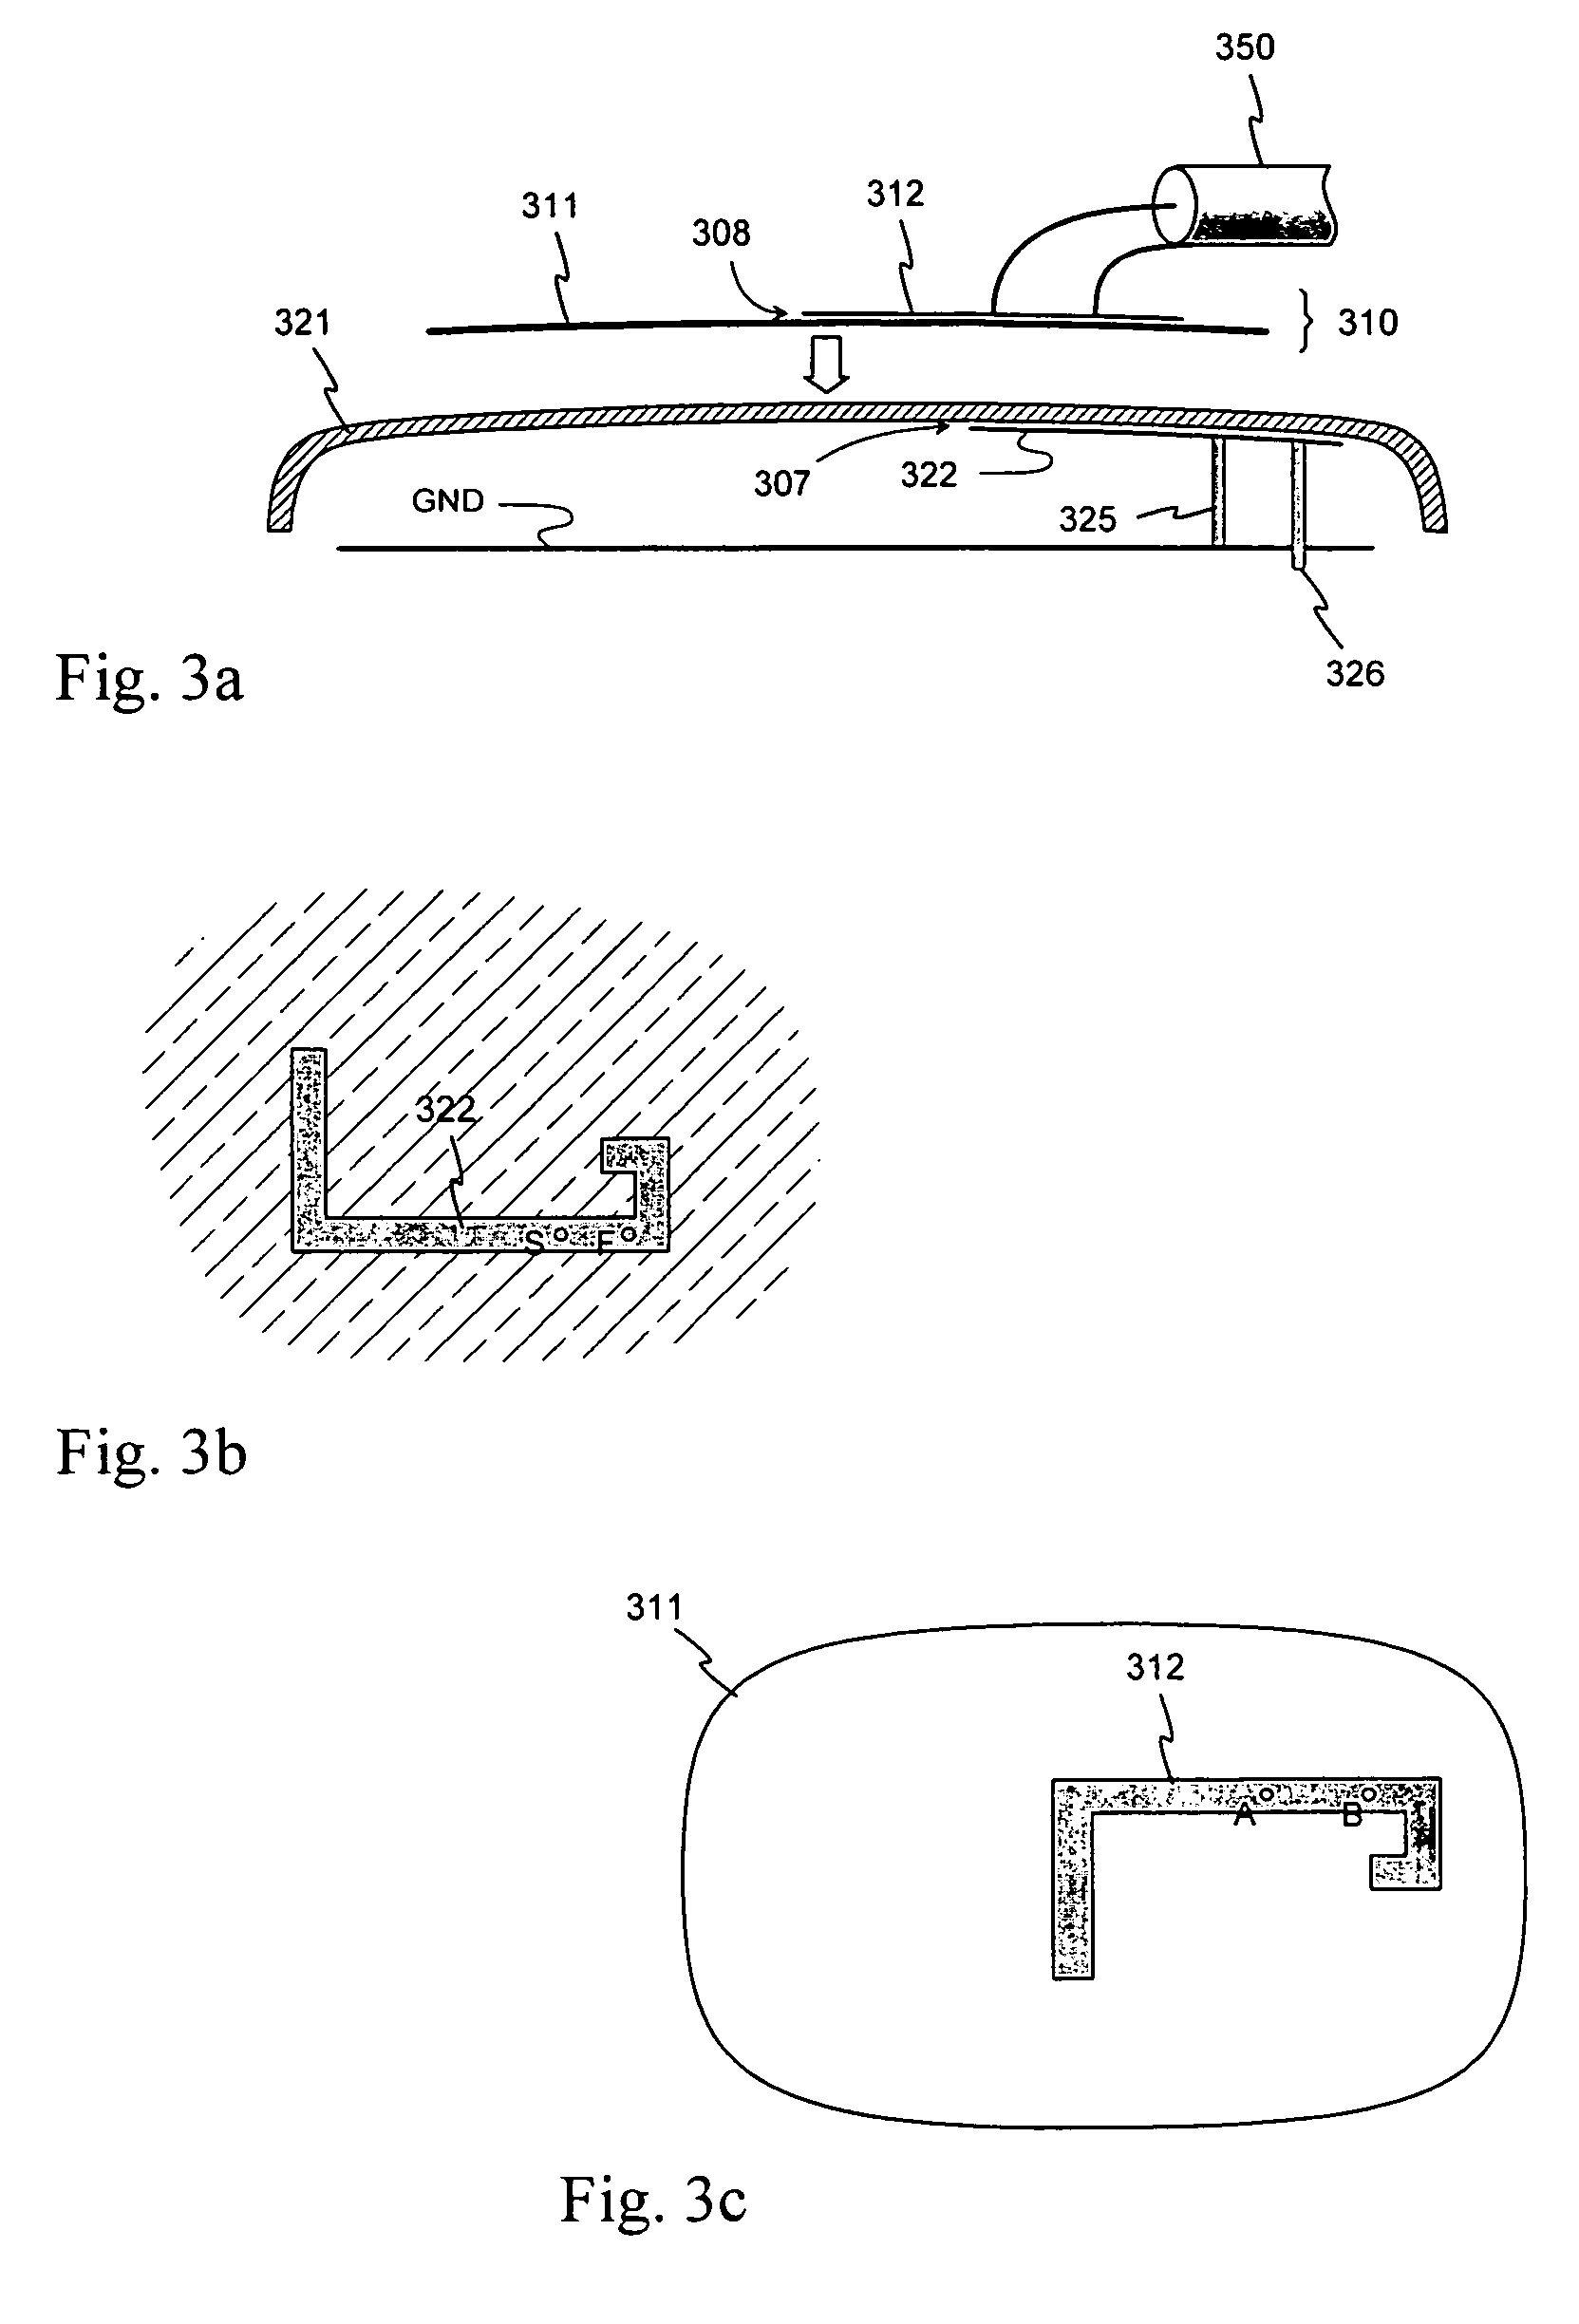 Antenna arrangement for connecting an external device to a radio device